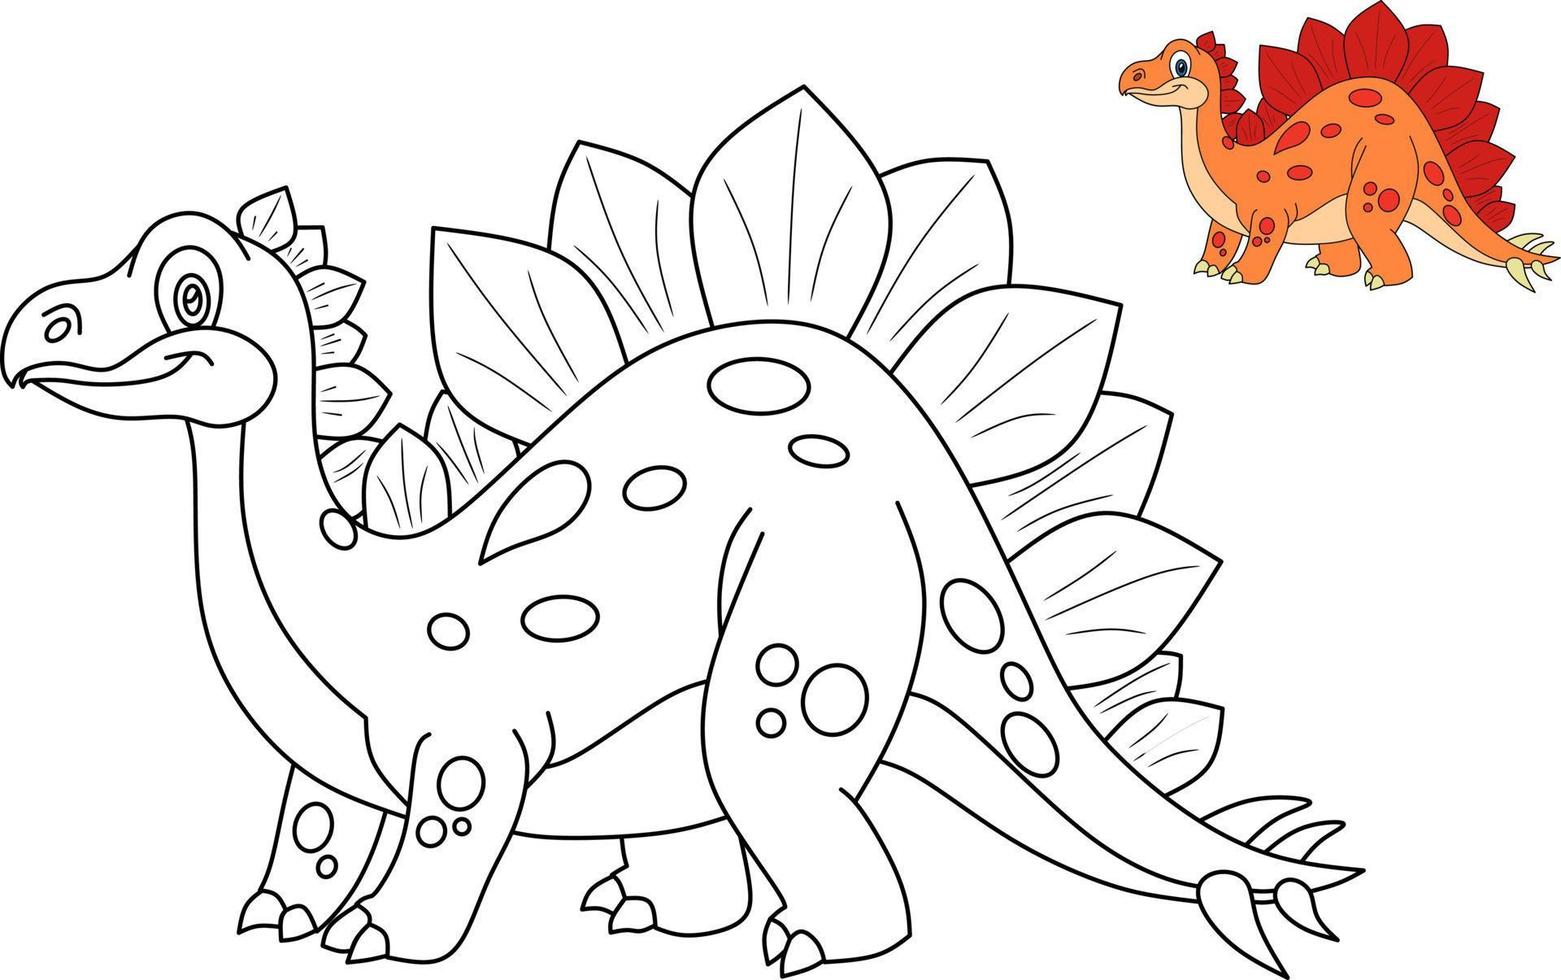 vector drawing of cartoon dinosaur, for coloring book